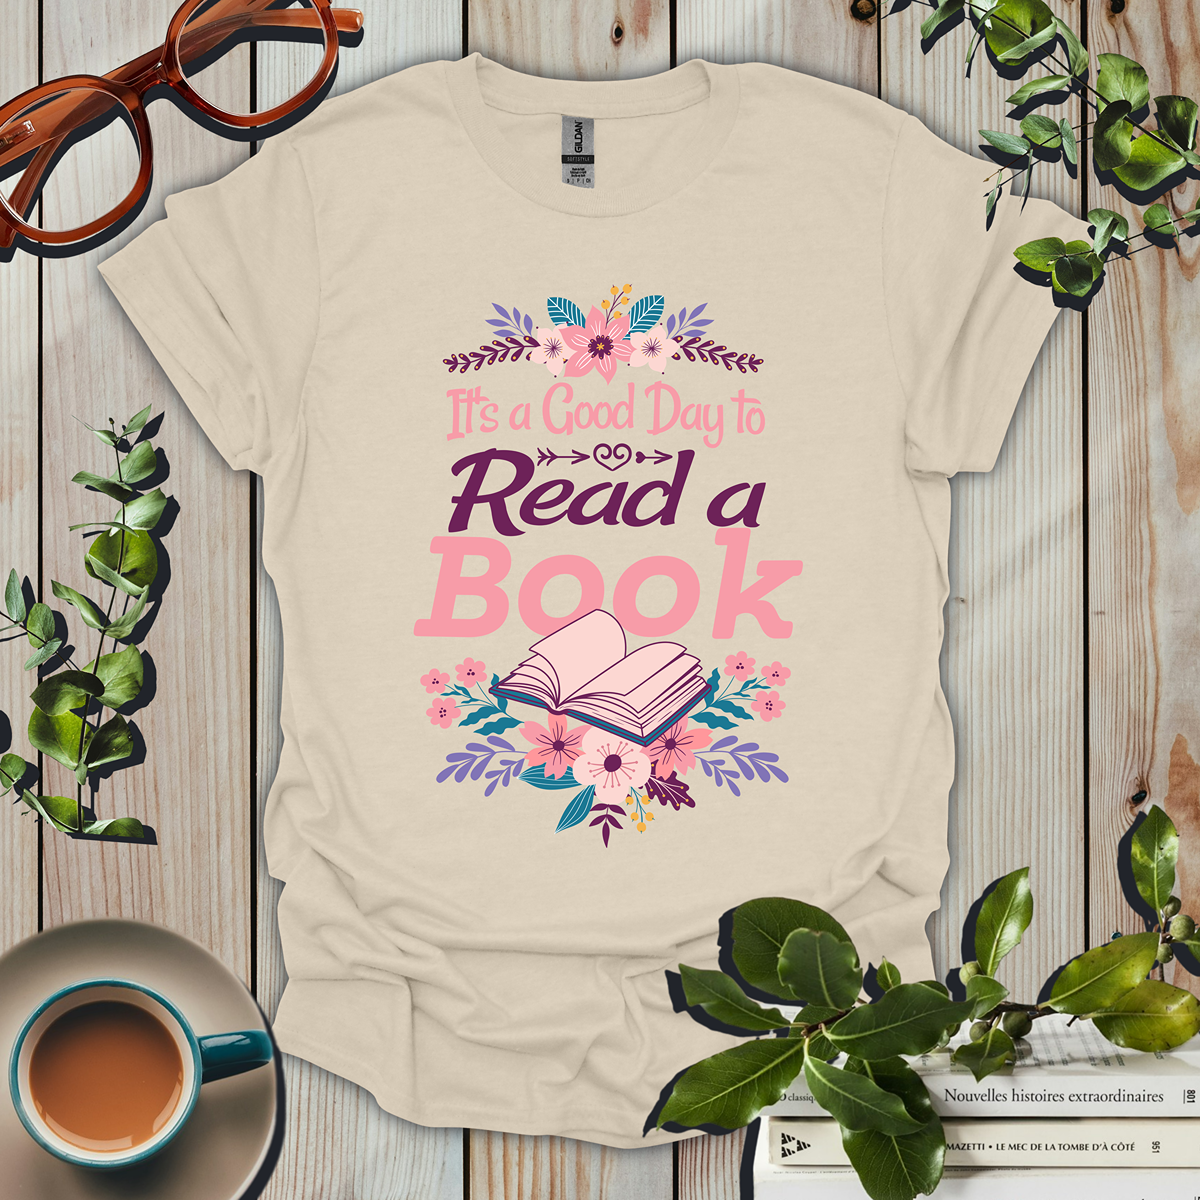 It's a Good Day To Read a Book T-Shirt